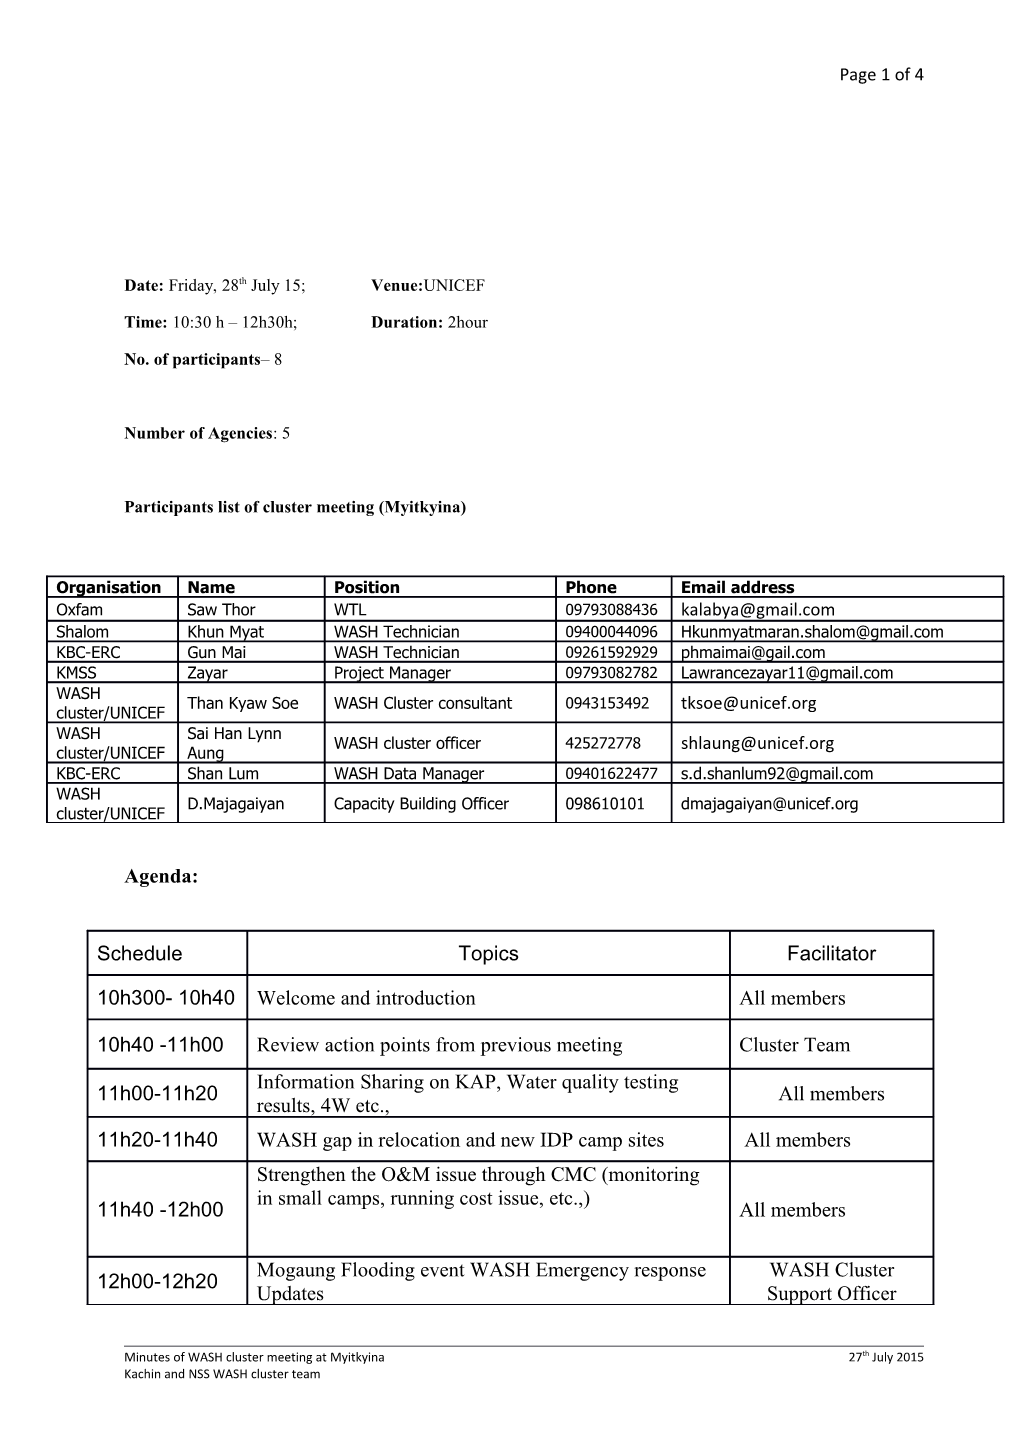 Participants List of Cluster Meeting (Myitkyina)